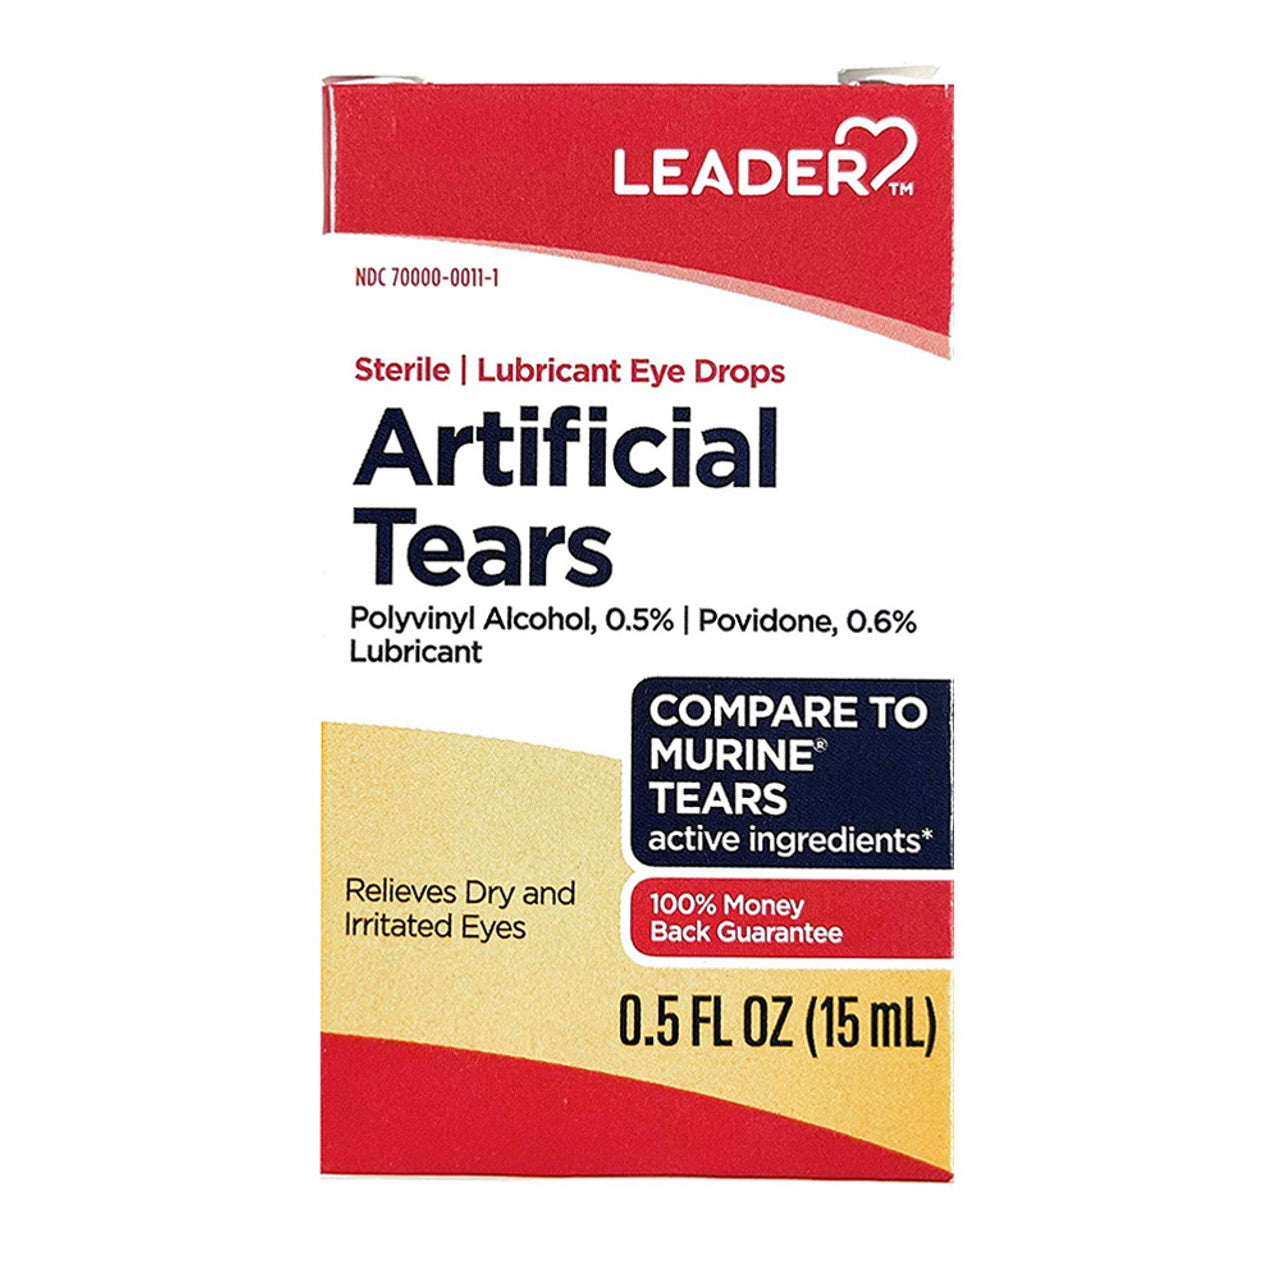 Leader Artificial Tears Ophthalmic Lubricant Eyes Drops, 0.5 Oz